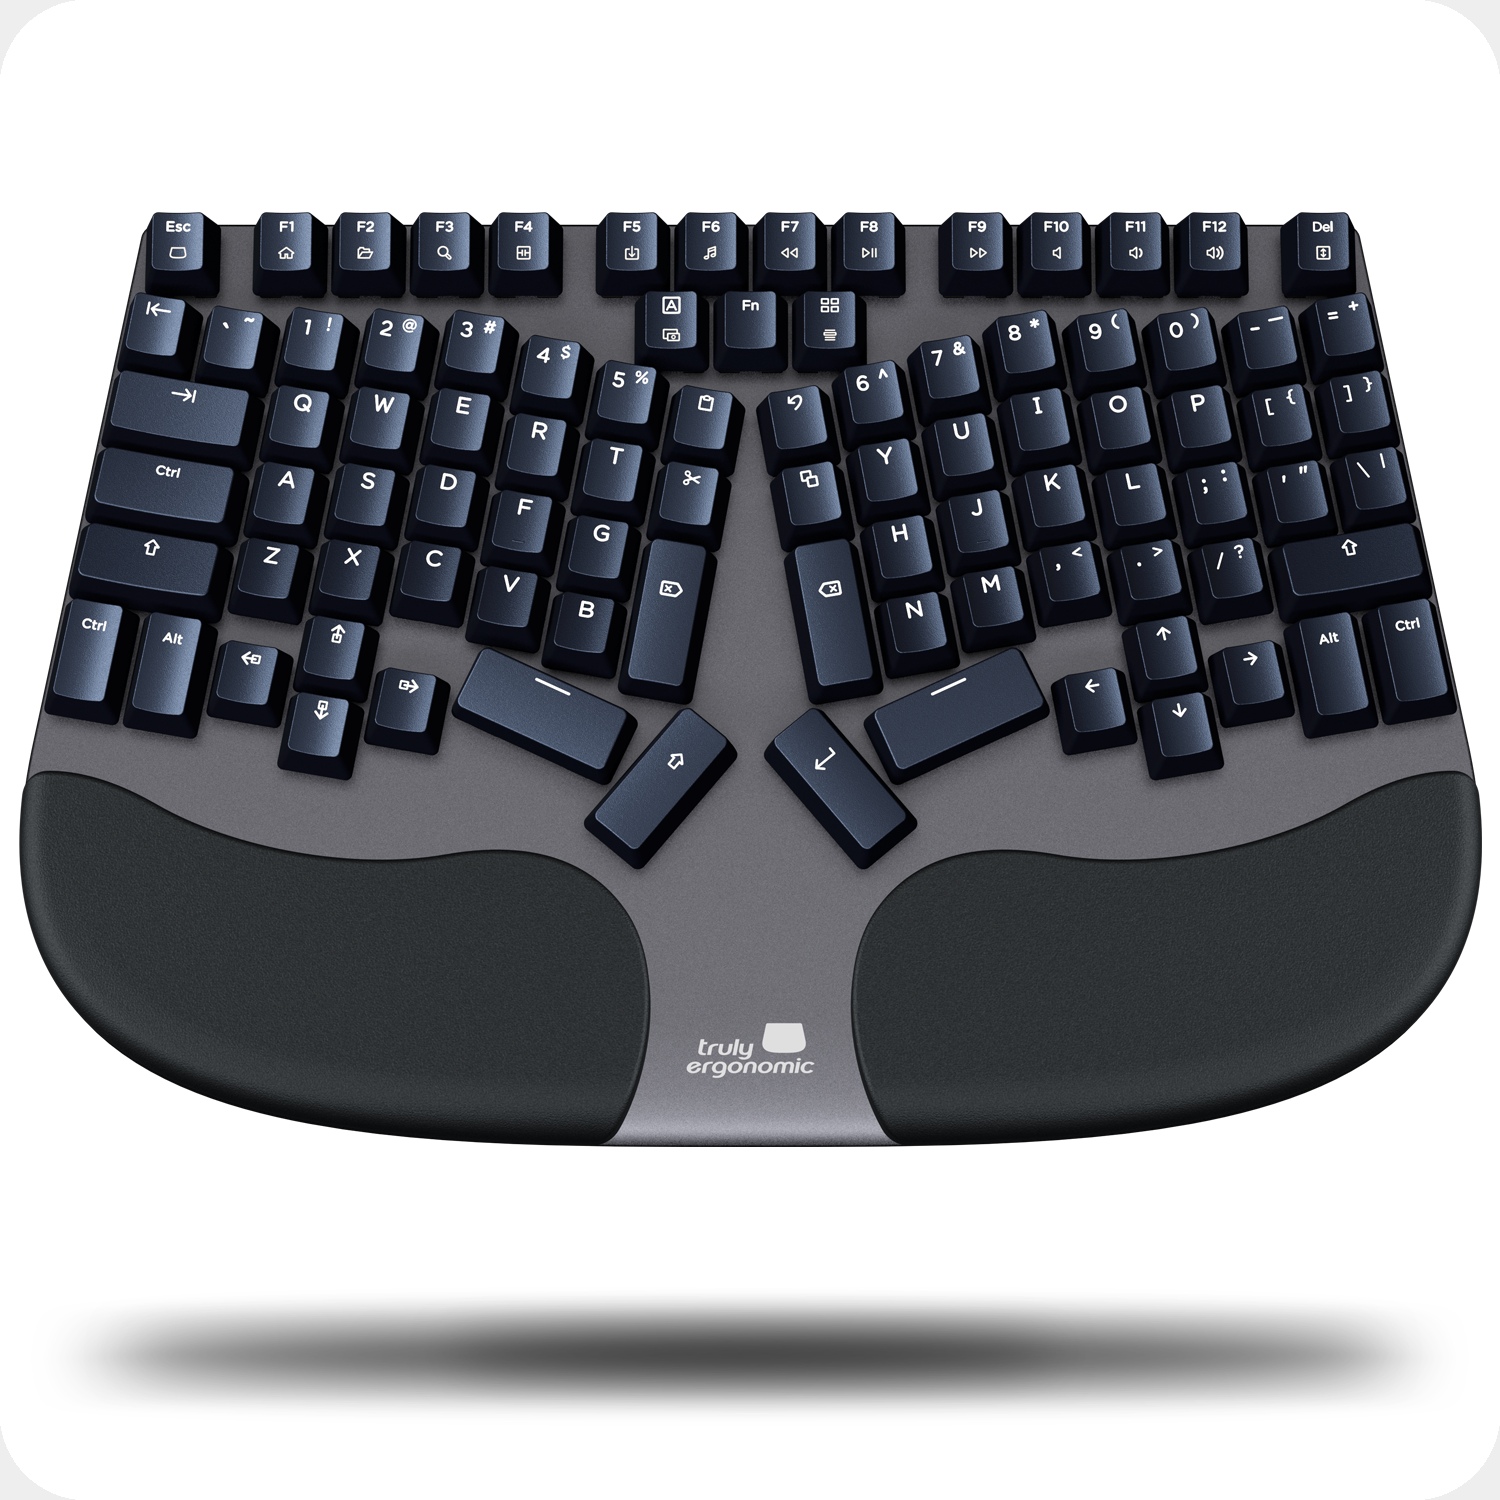 Truly Ergonomic CLEAVE Keyboard - Optical Mechanical Switches